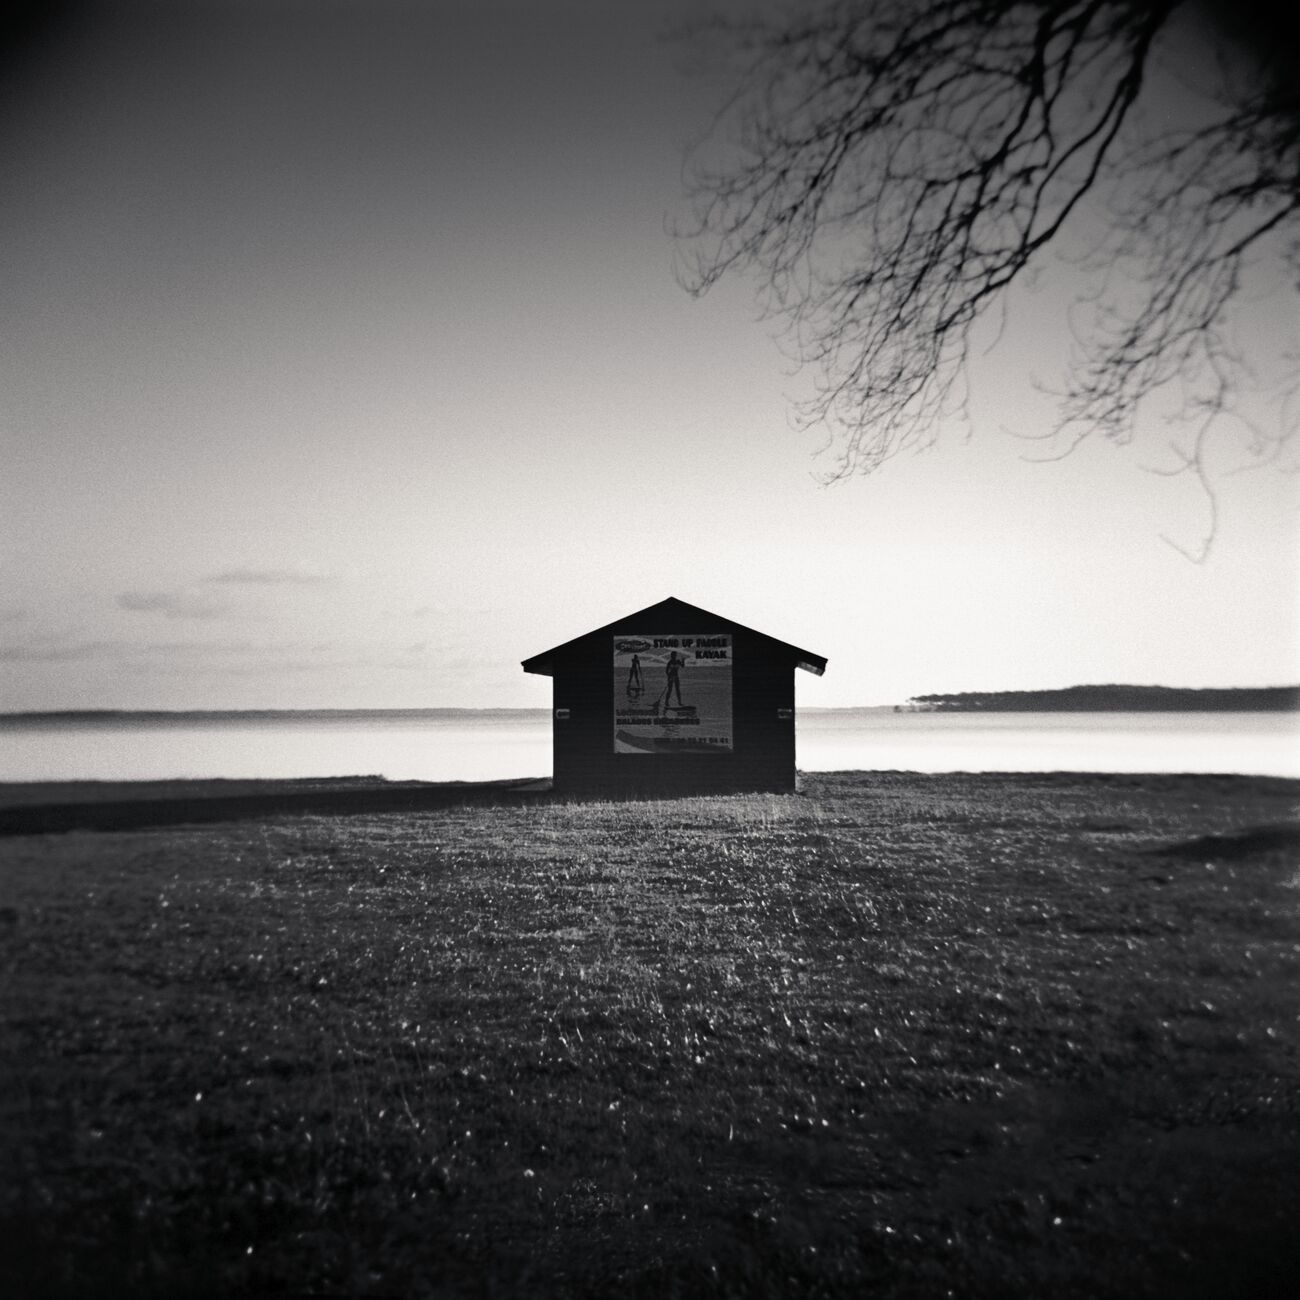 Shed By The Lake, Study 1, Carreyre, Lacanau Lake, France. January 2021. Ref-1408 - Denis Olivier Photography